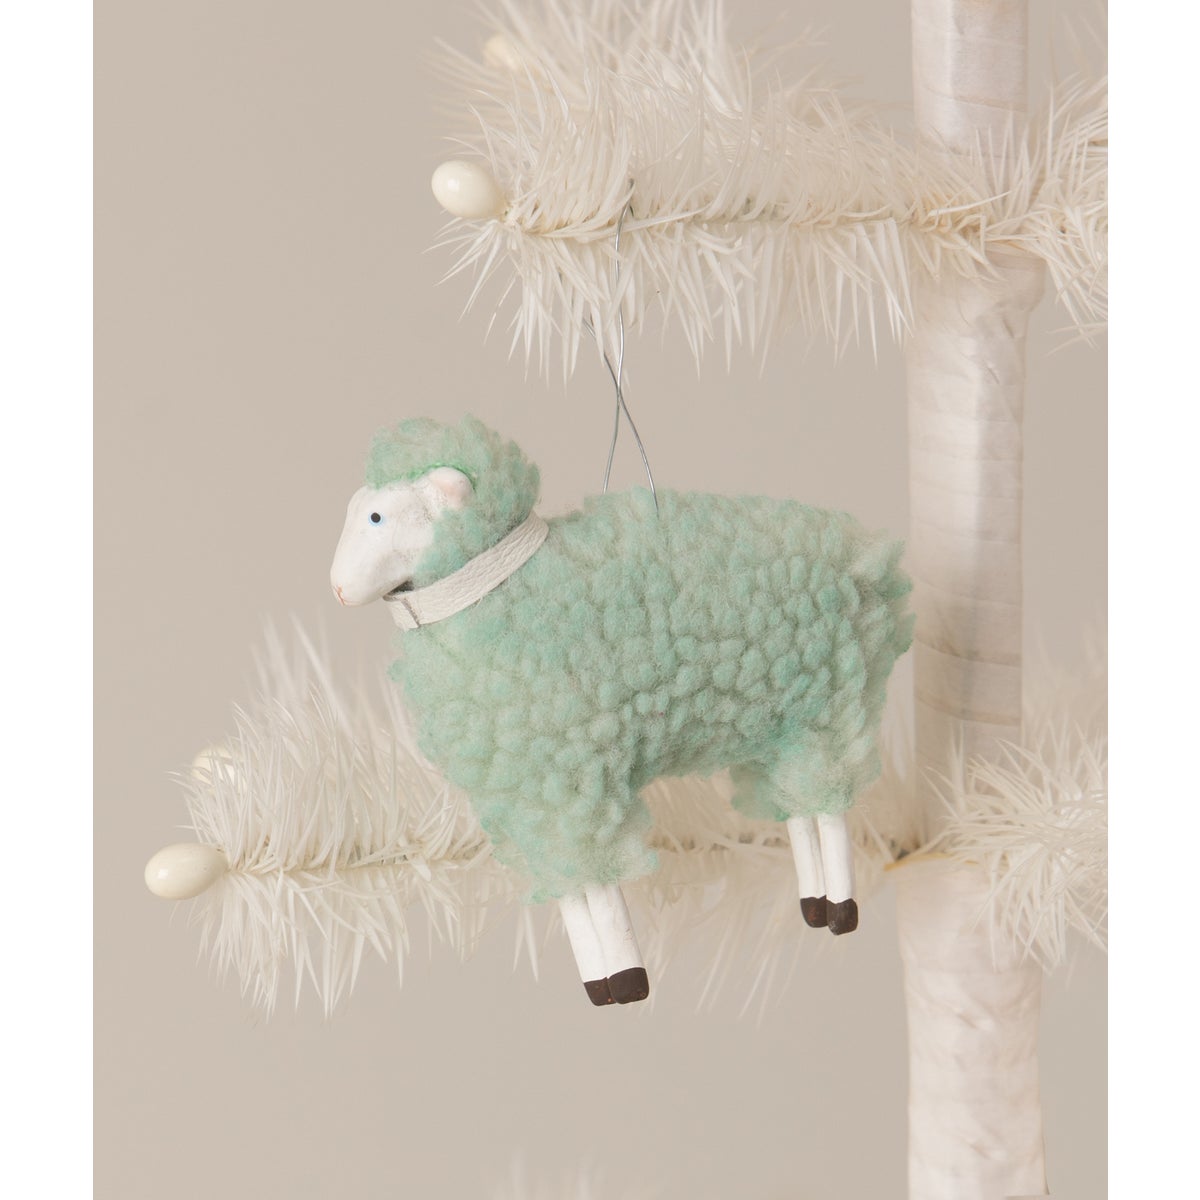 Bethany Lowe Primitive Reproduction Pastel Sheep Ornament 4 colors to Choose